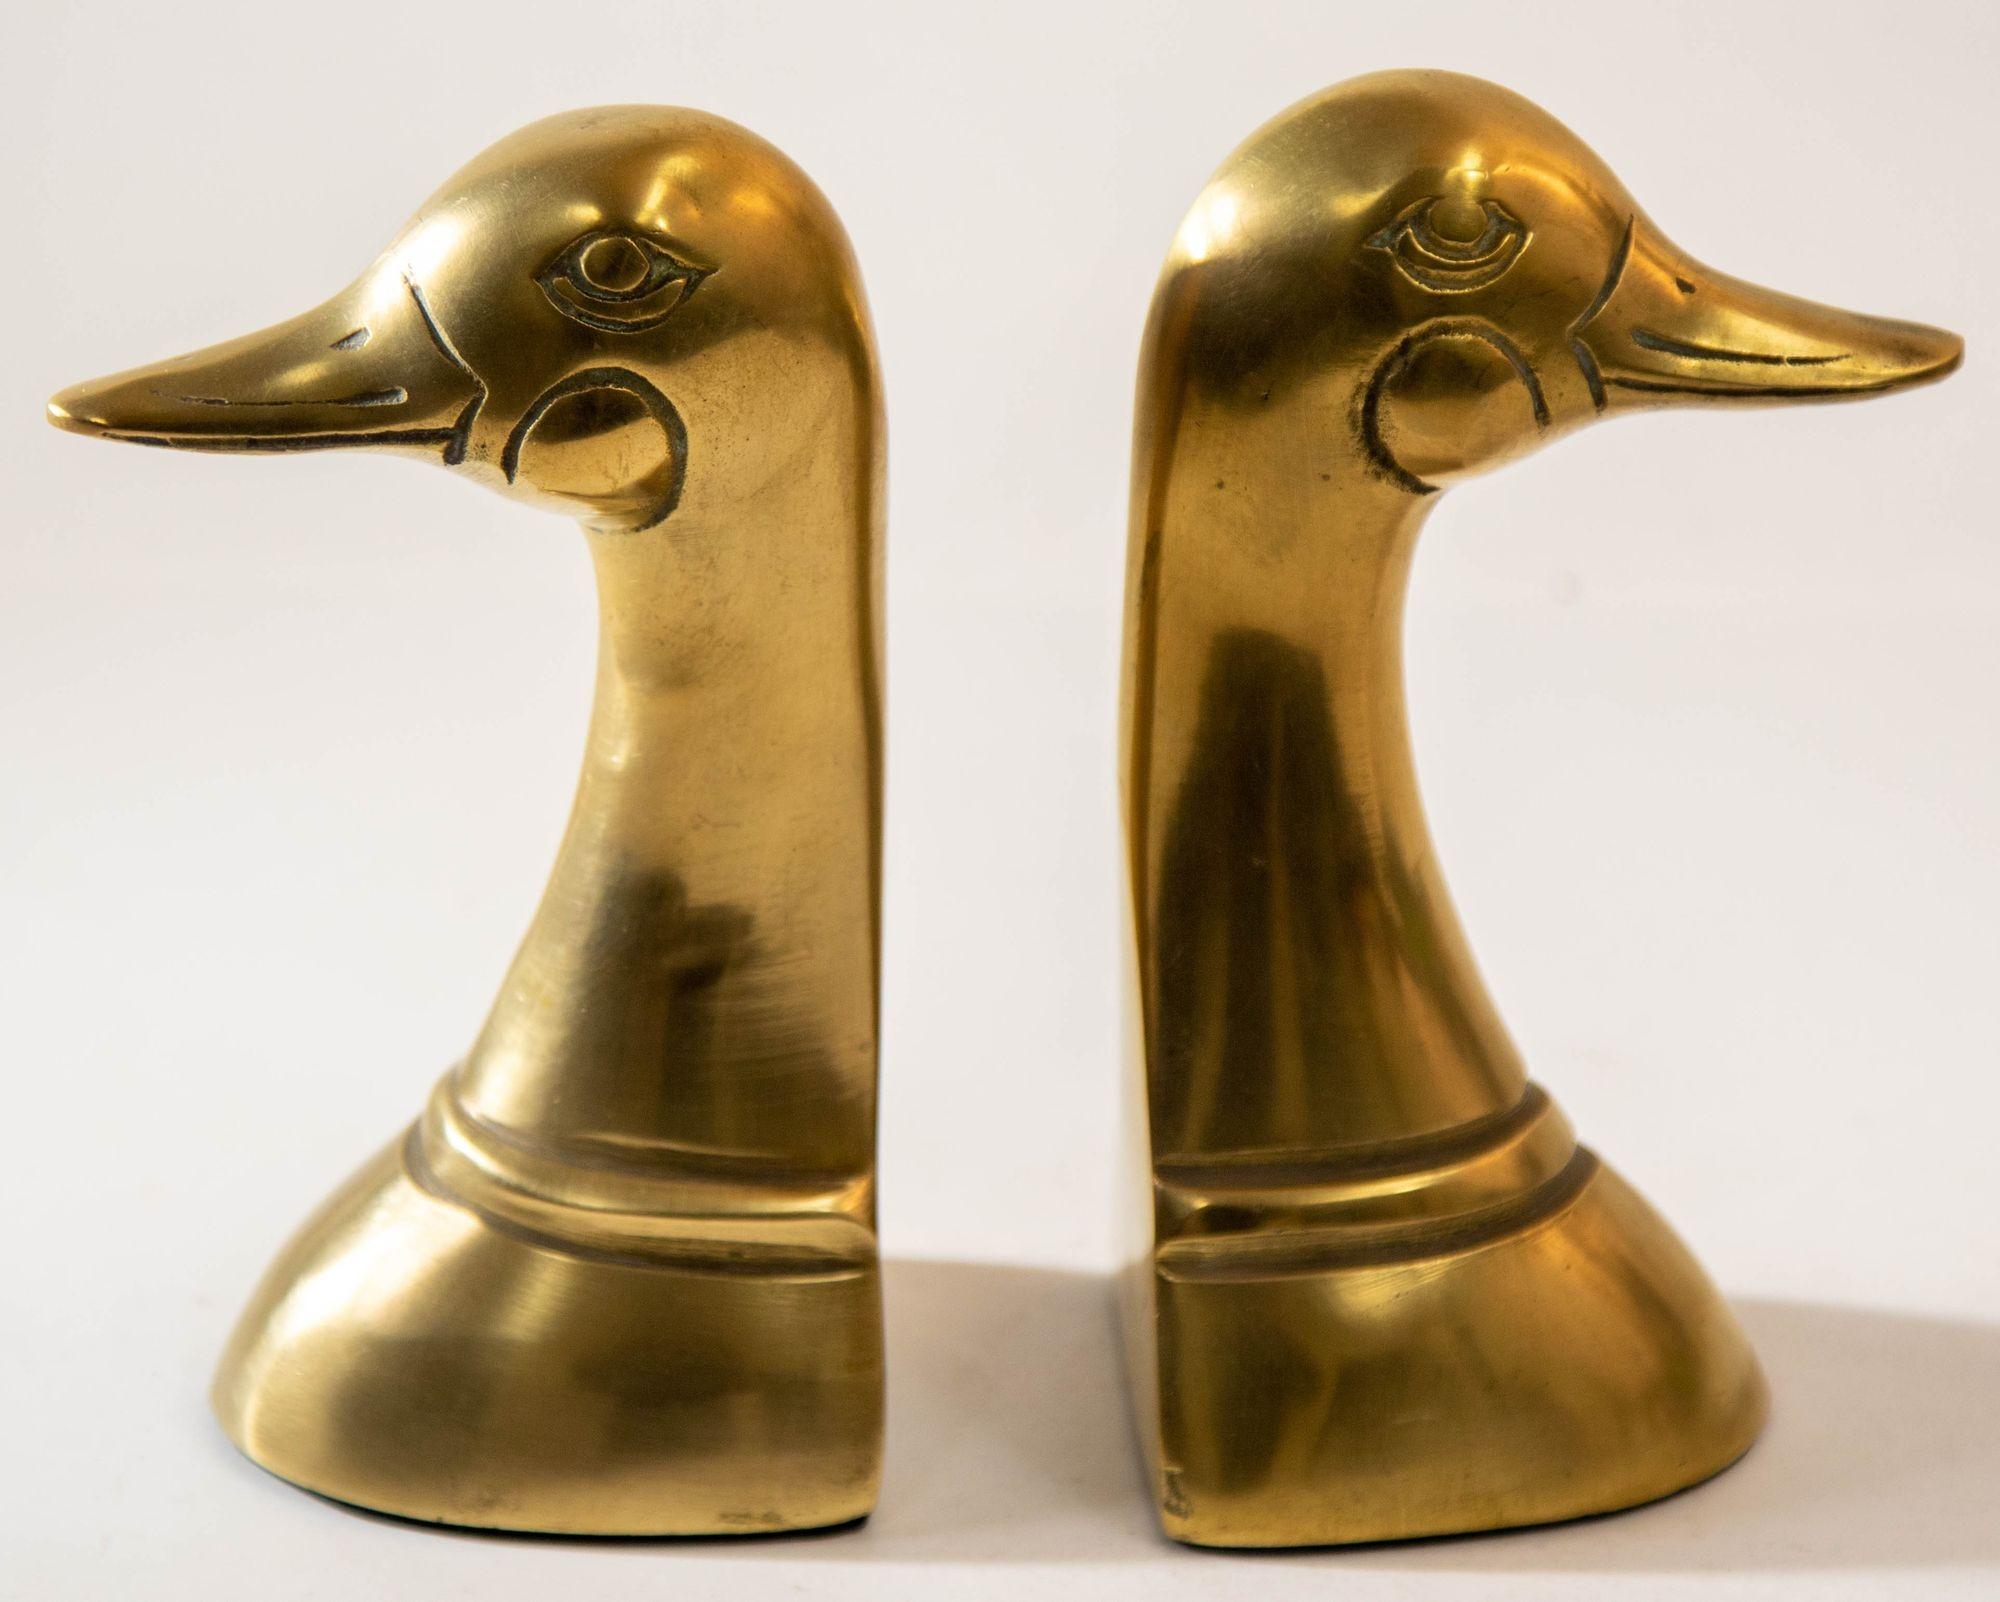 Polished Solid Brass Mallard Duck Head Bookends Sarreid Style 1950's A Pair For Sale 5